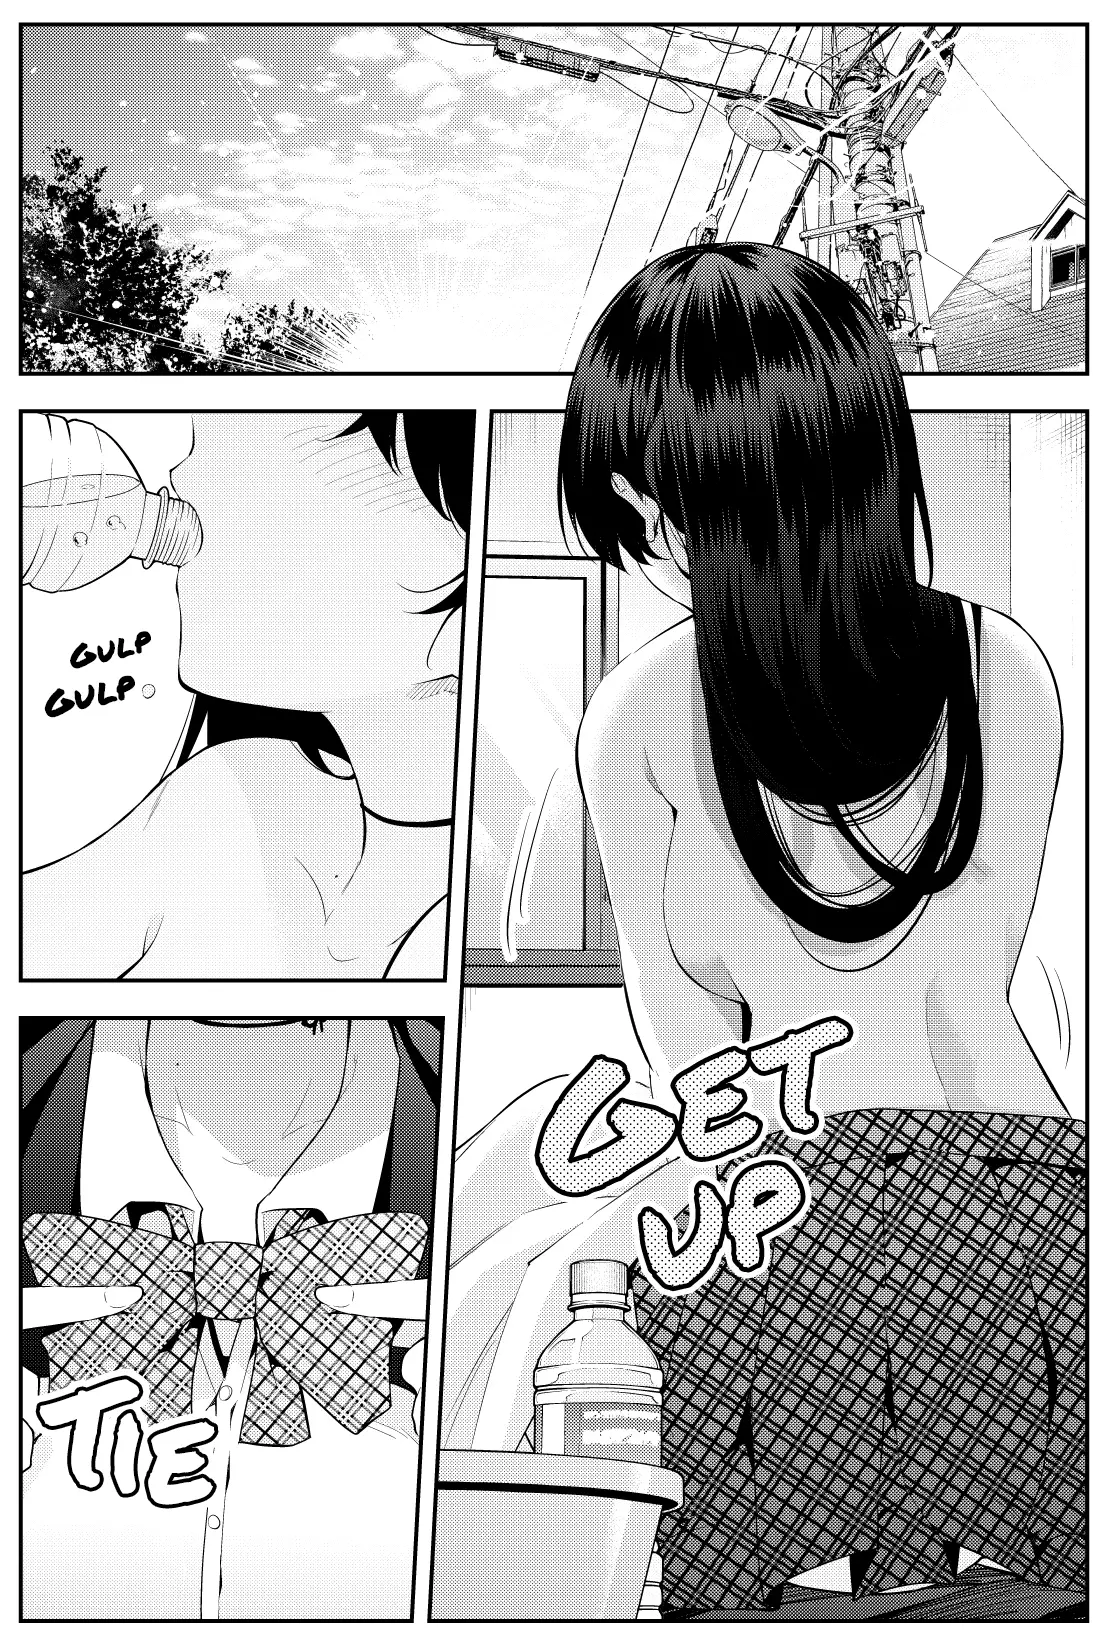 The Story Of A Manga Artist Confined By A Strange High School Girl - 48 page 1-808da2ba